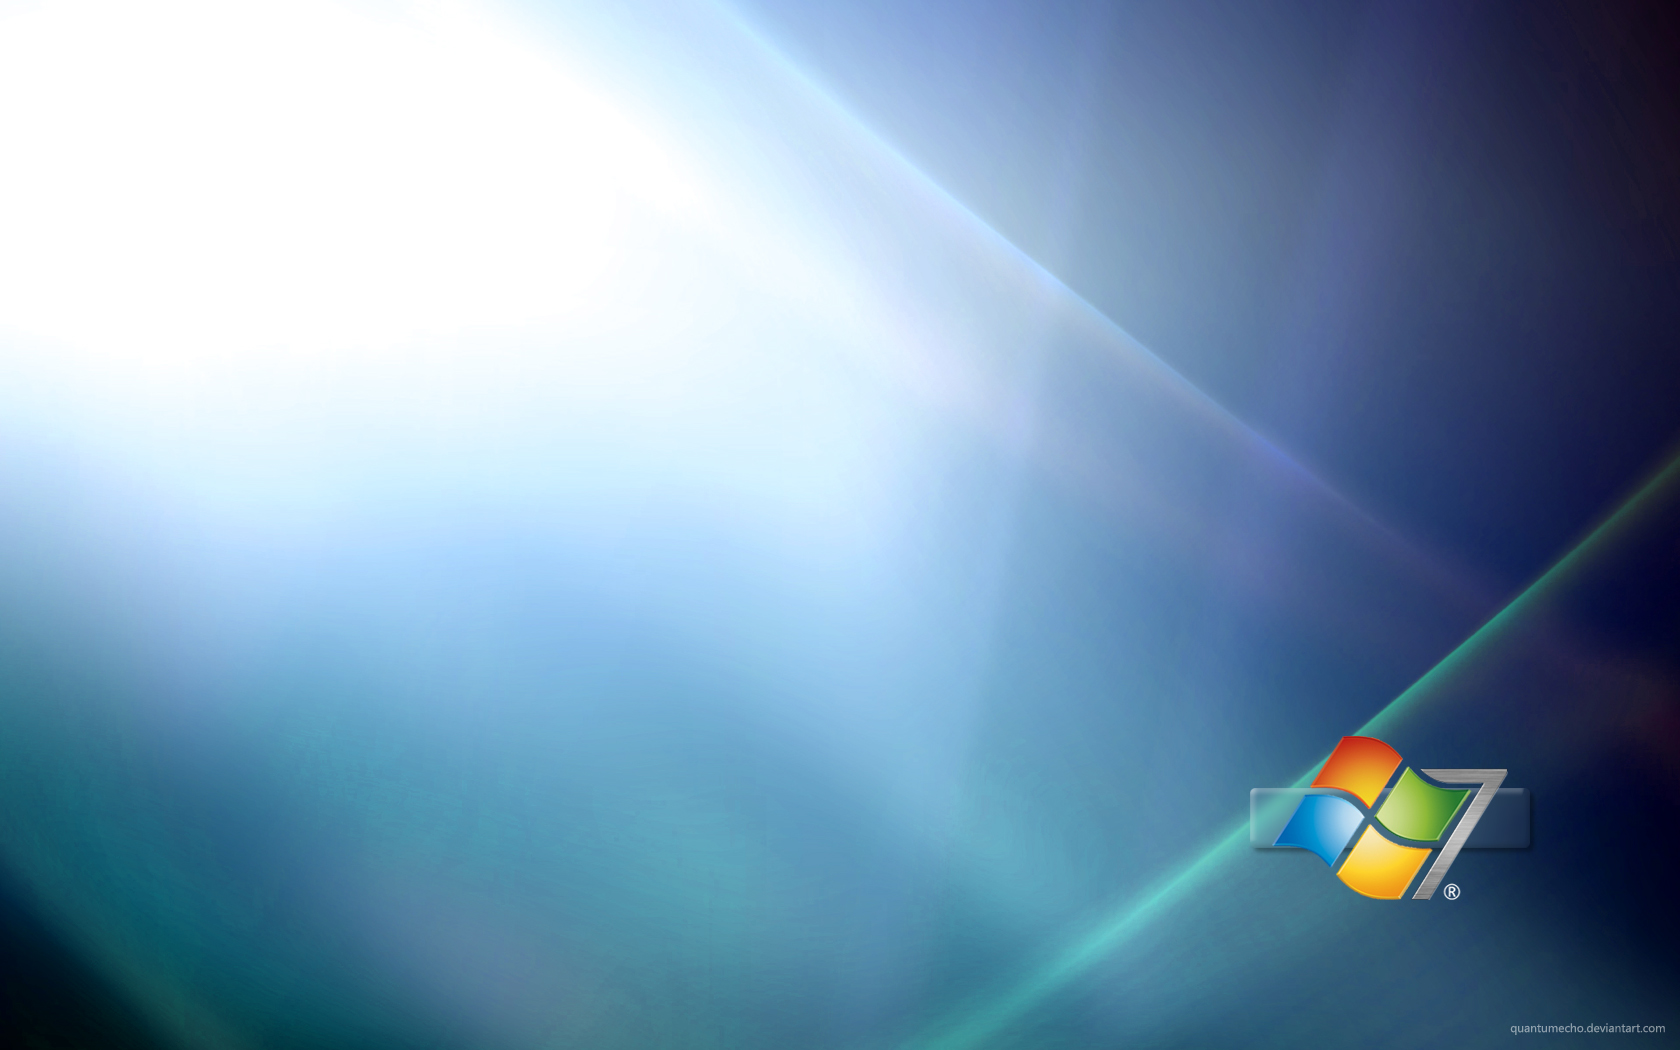 Free HQ Windows 7 Ultimate 20 Wallpaper   Free HQ Wallpapers